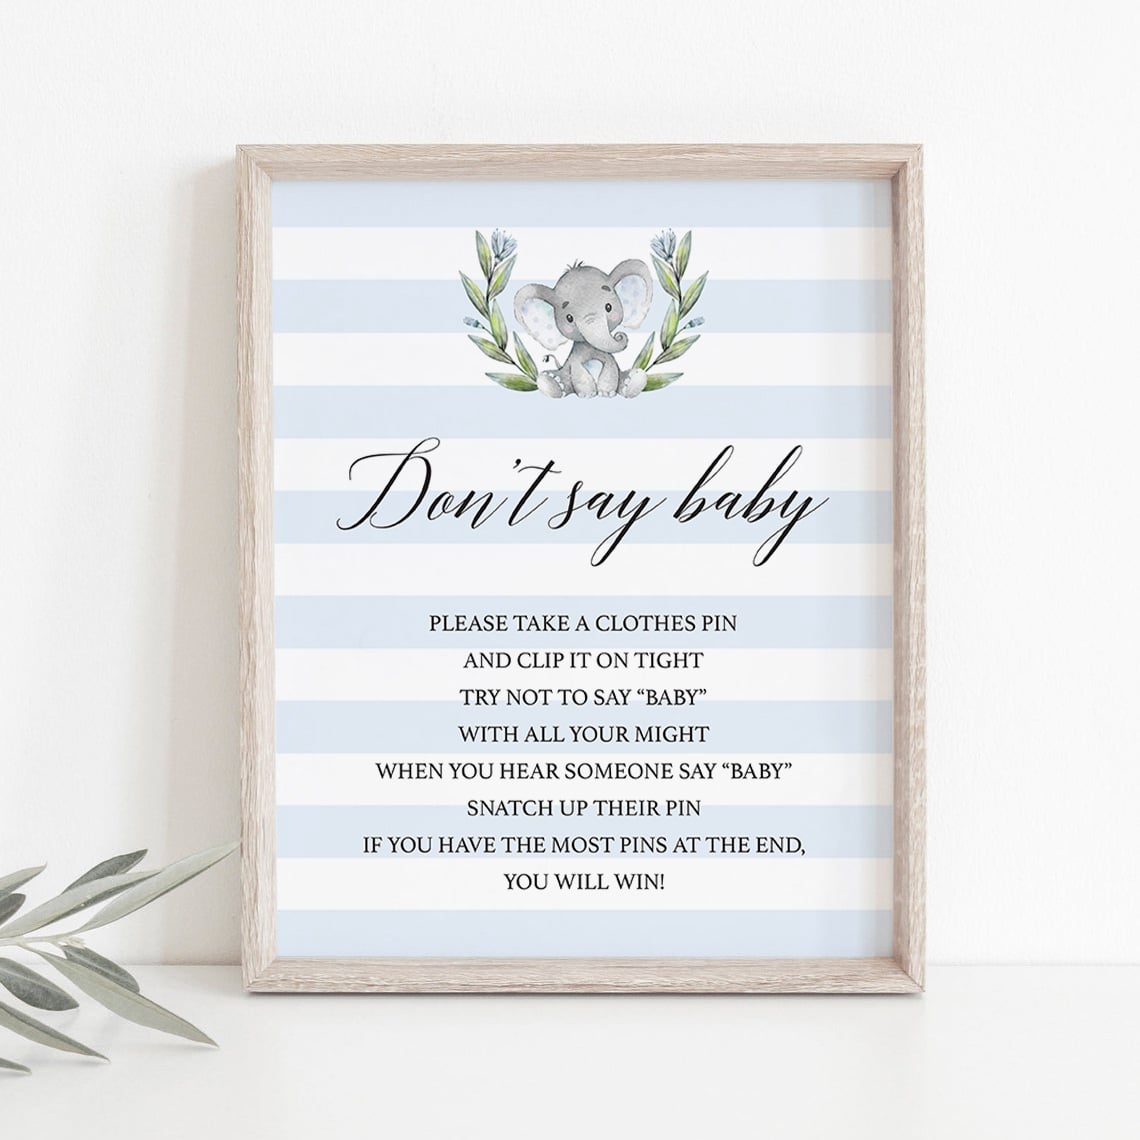 Blue and white baby shower games dont say the word baby by LittleSizzle